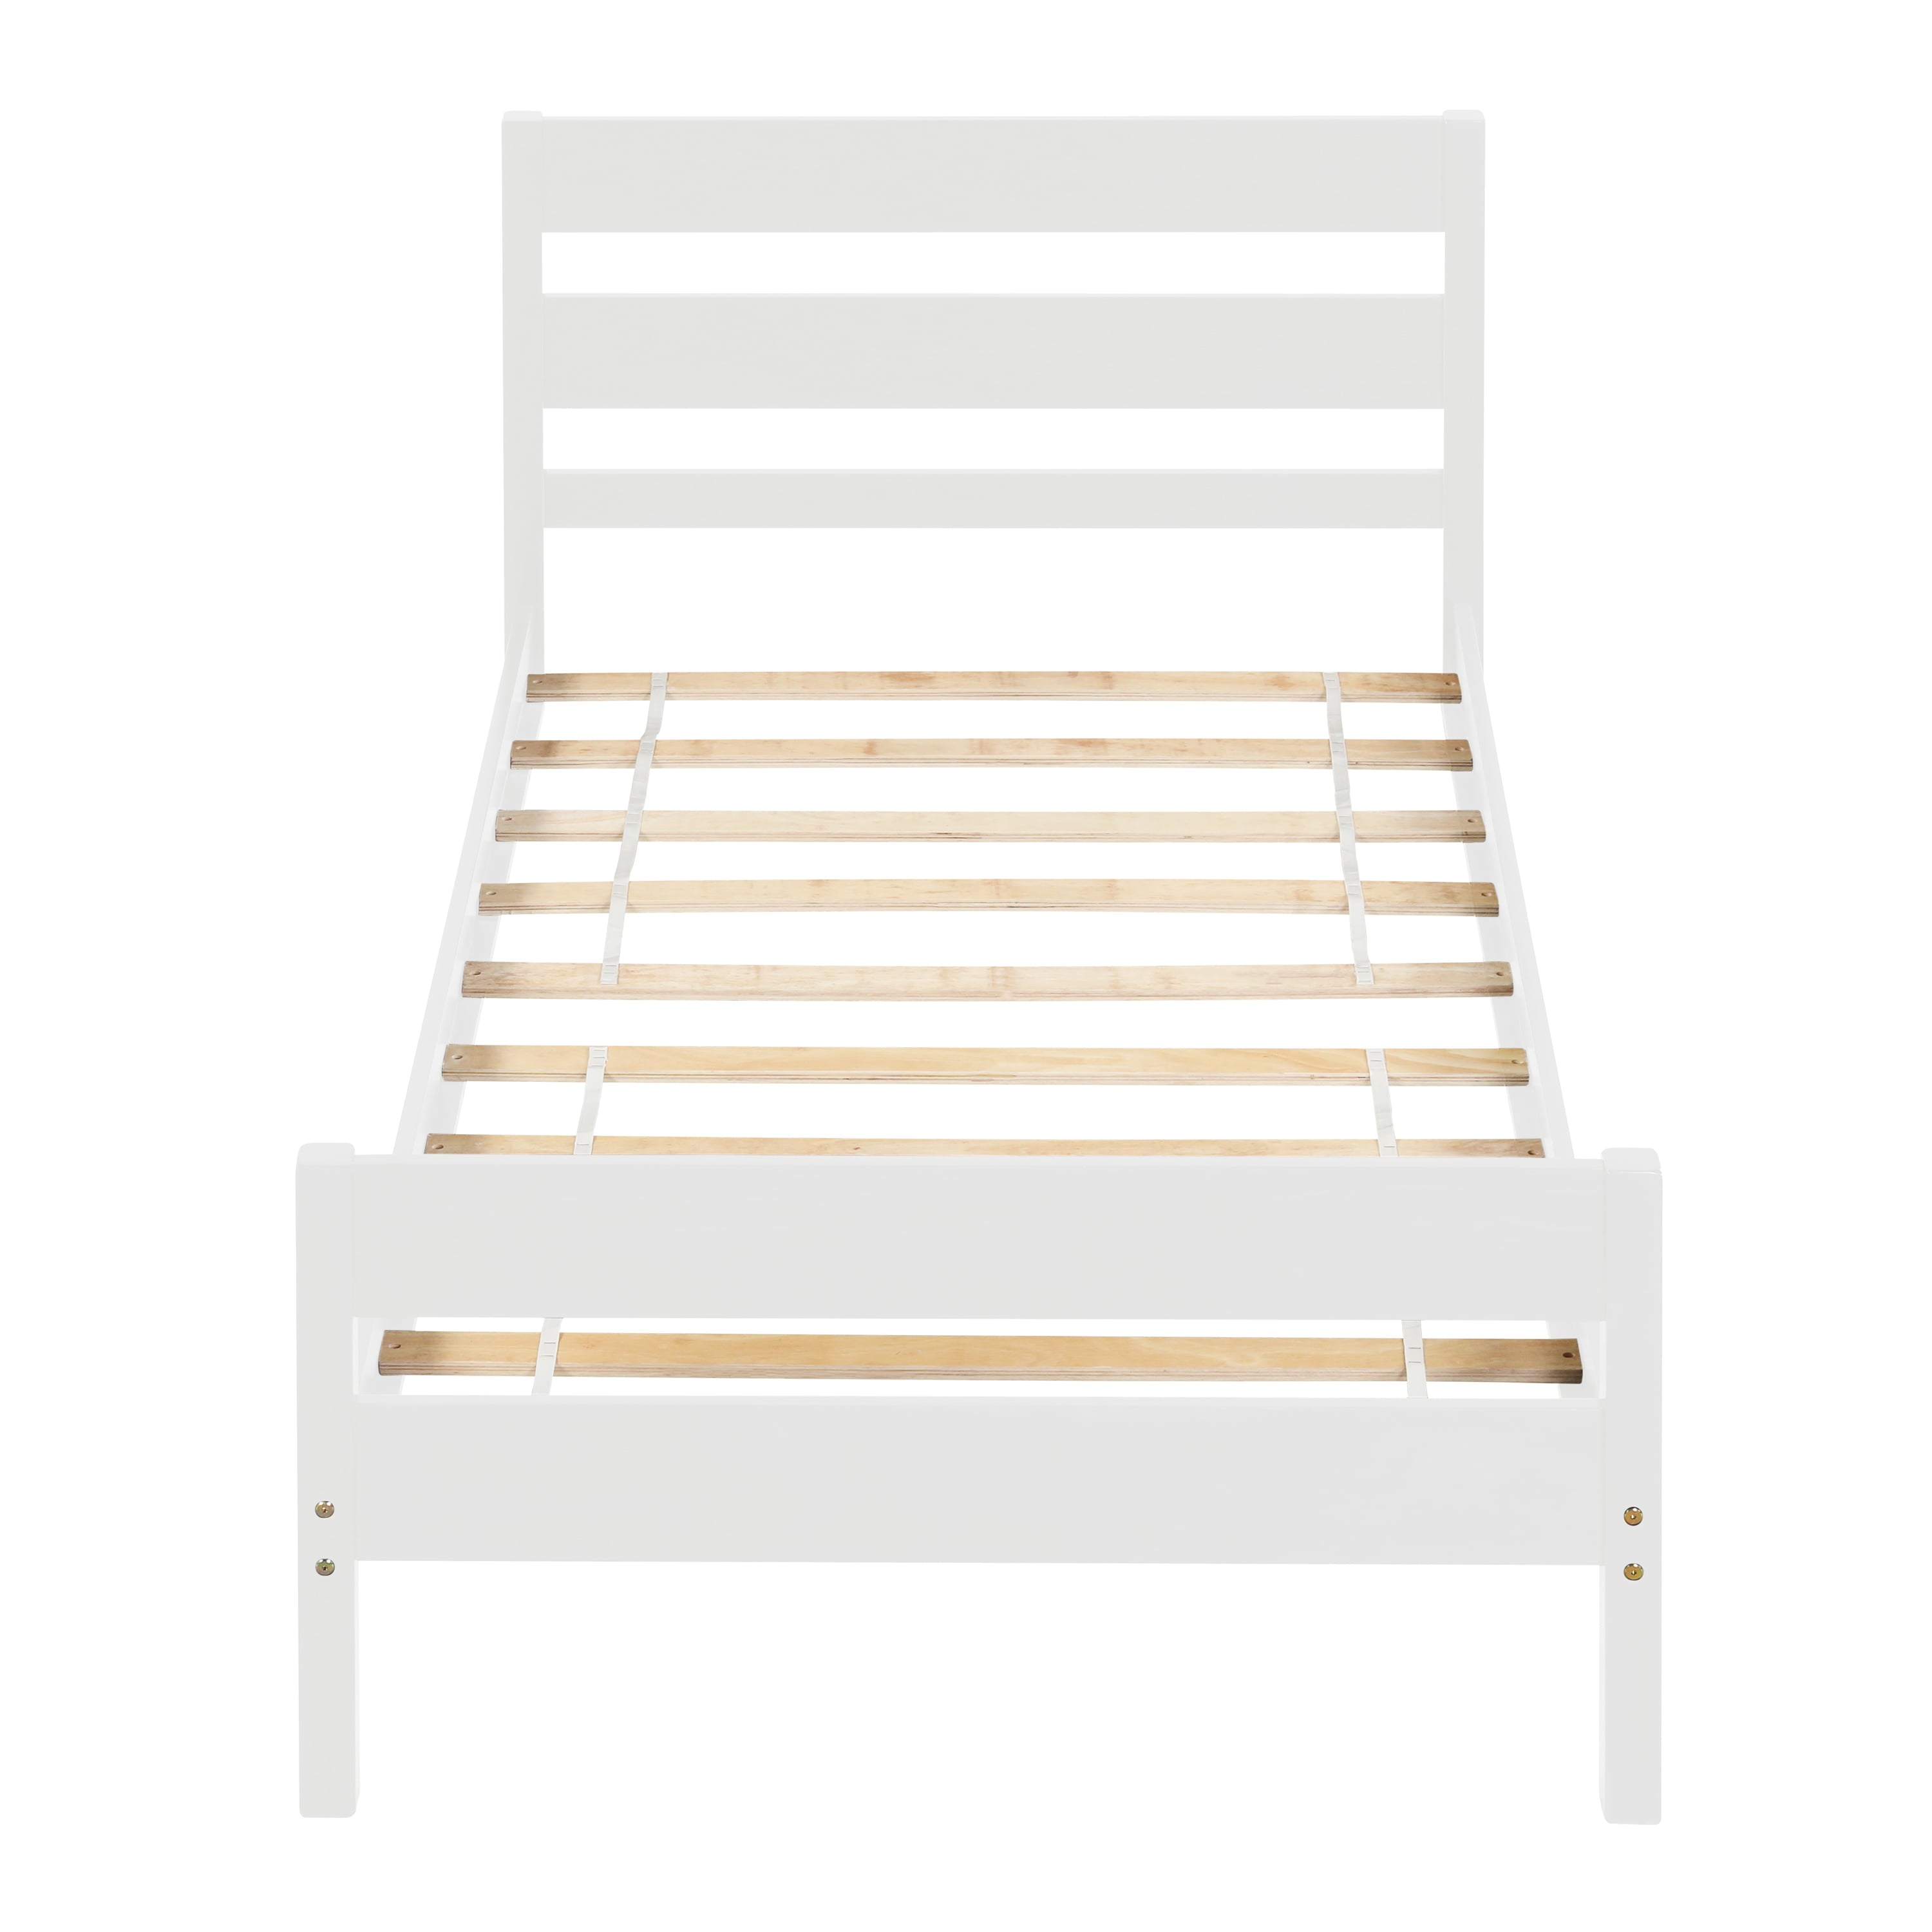 BTMWAY Wood Twin Bed Frame for Kids Adults, Solid Wood Platform Bed Frame with Headboard and Footboard, Modern Twin Size Bed Frame with Wooden Slats Support, No Box Spring Needed, White